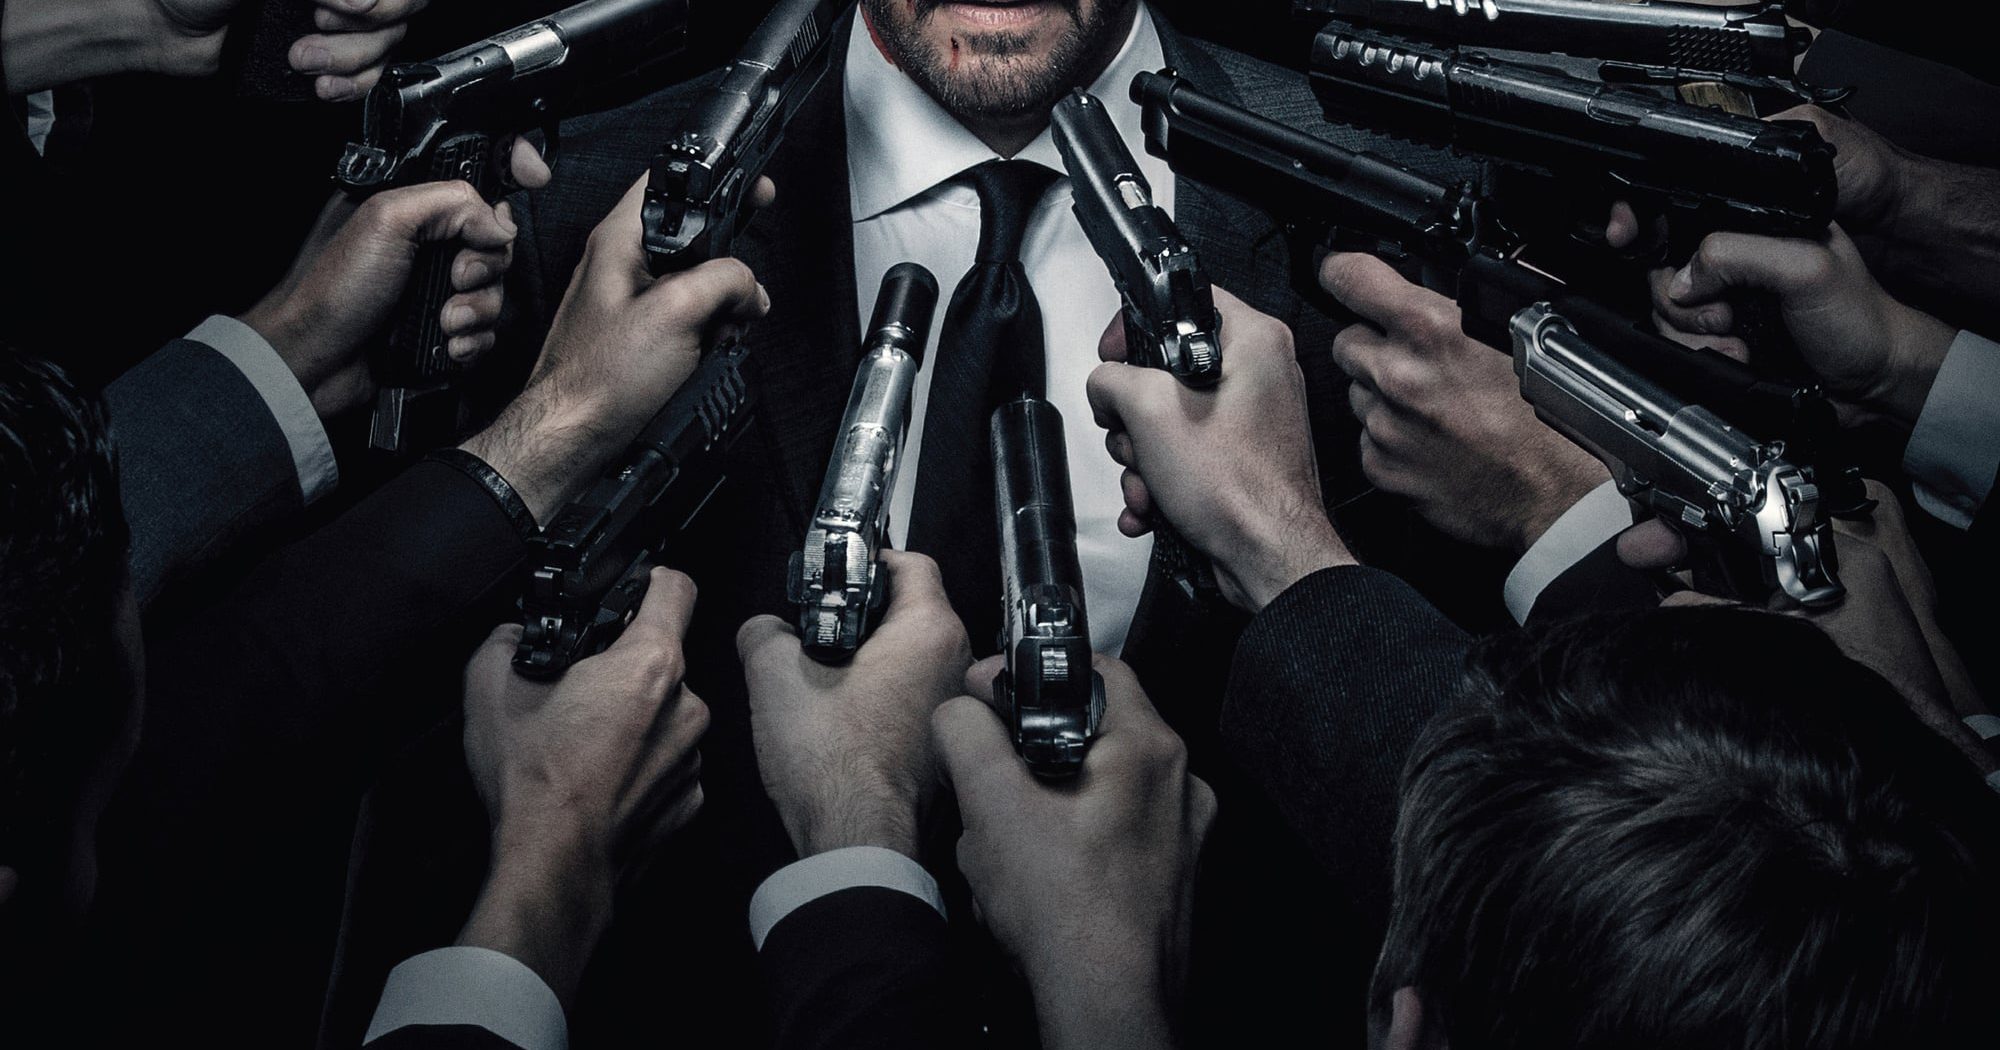 Poster for the movie "John Wick: Chapter 2"